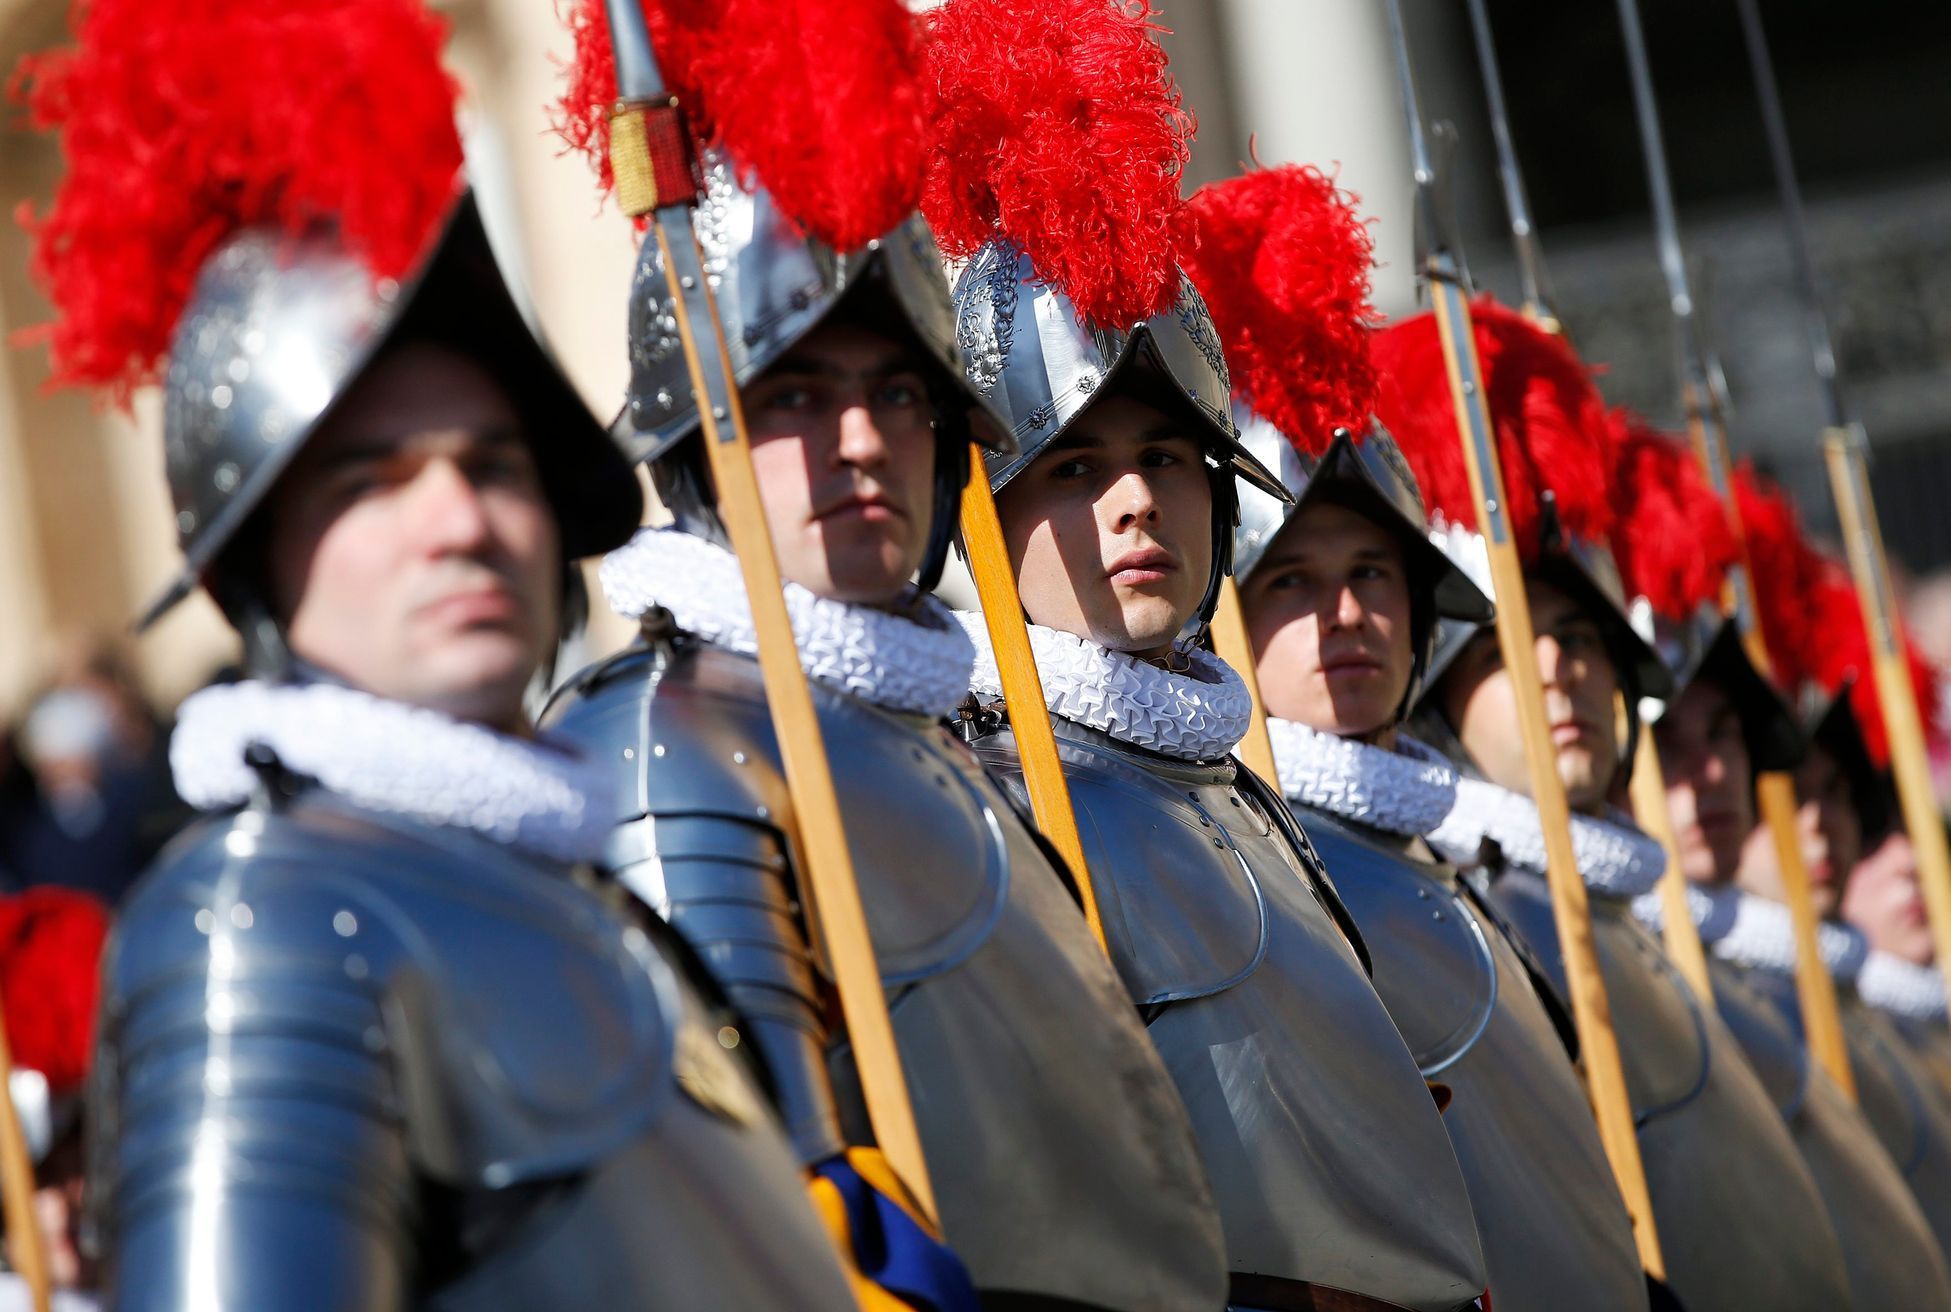 Swiss guards stand to attention before the arrival of Pope Francis to lead the Easter mass in Saint Peter's Square at the Vatican